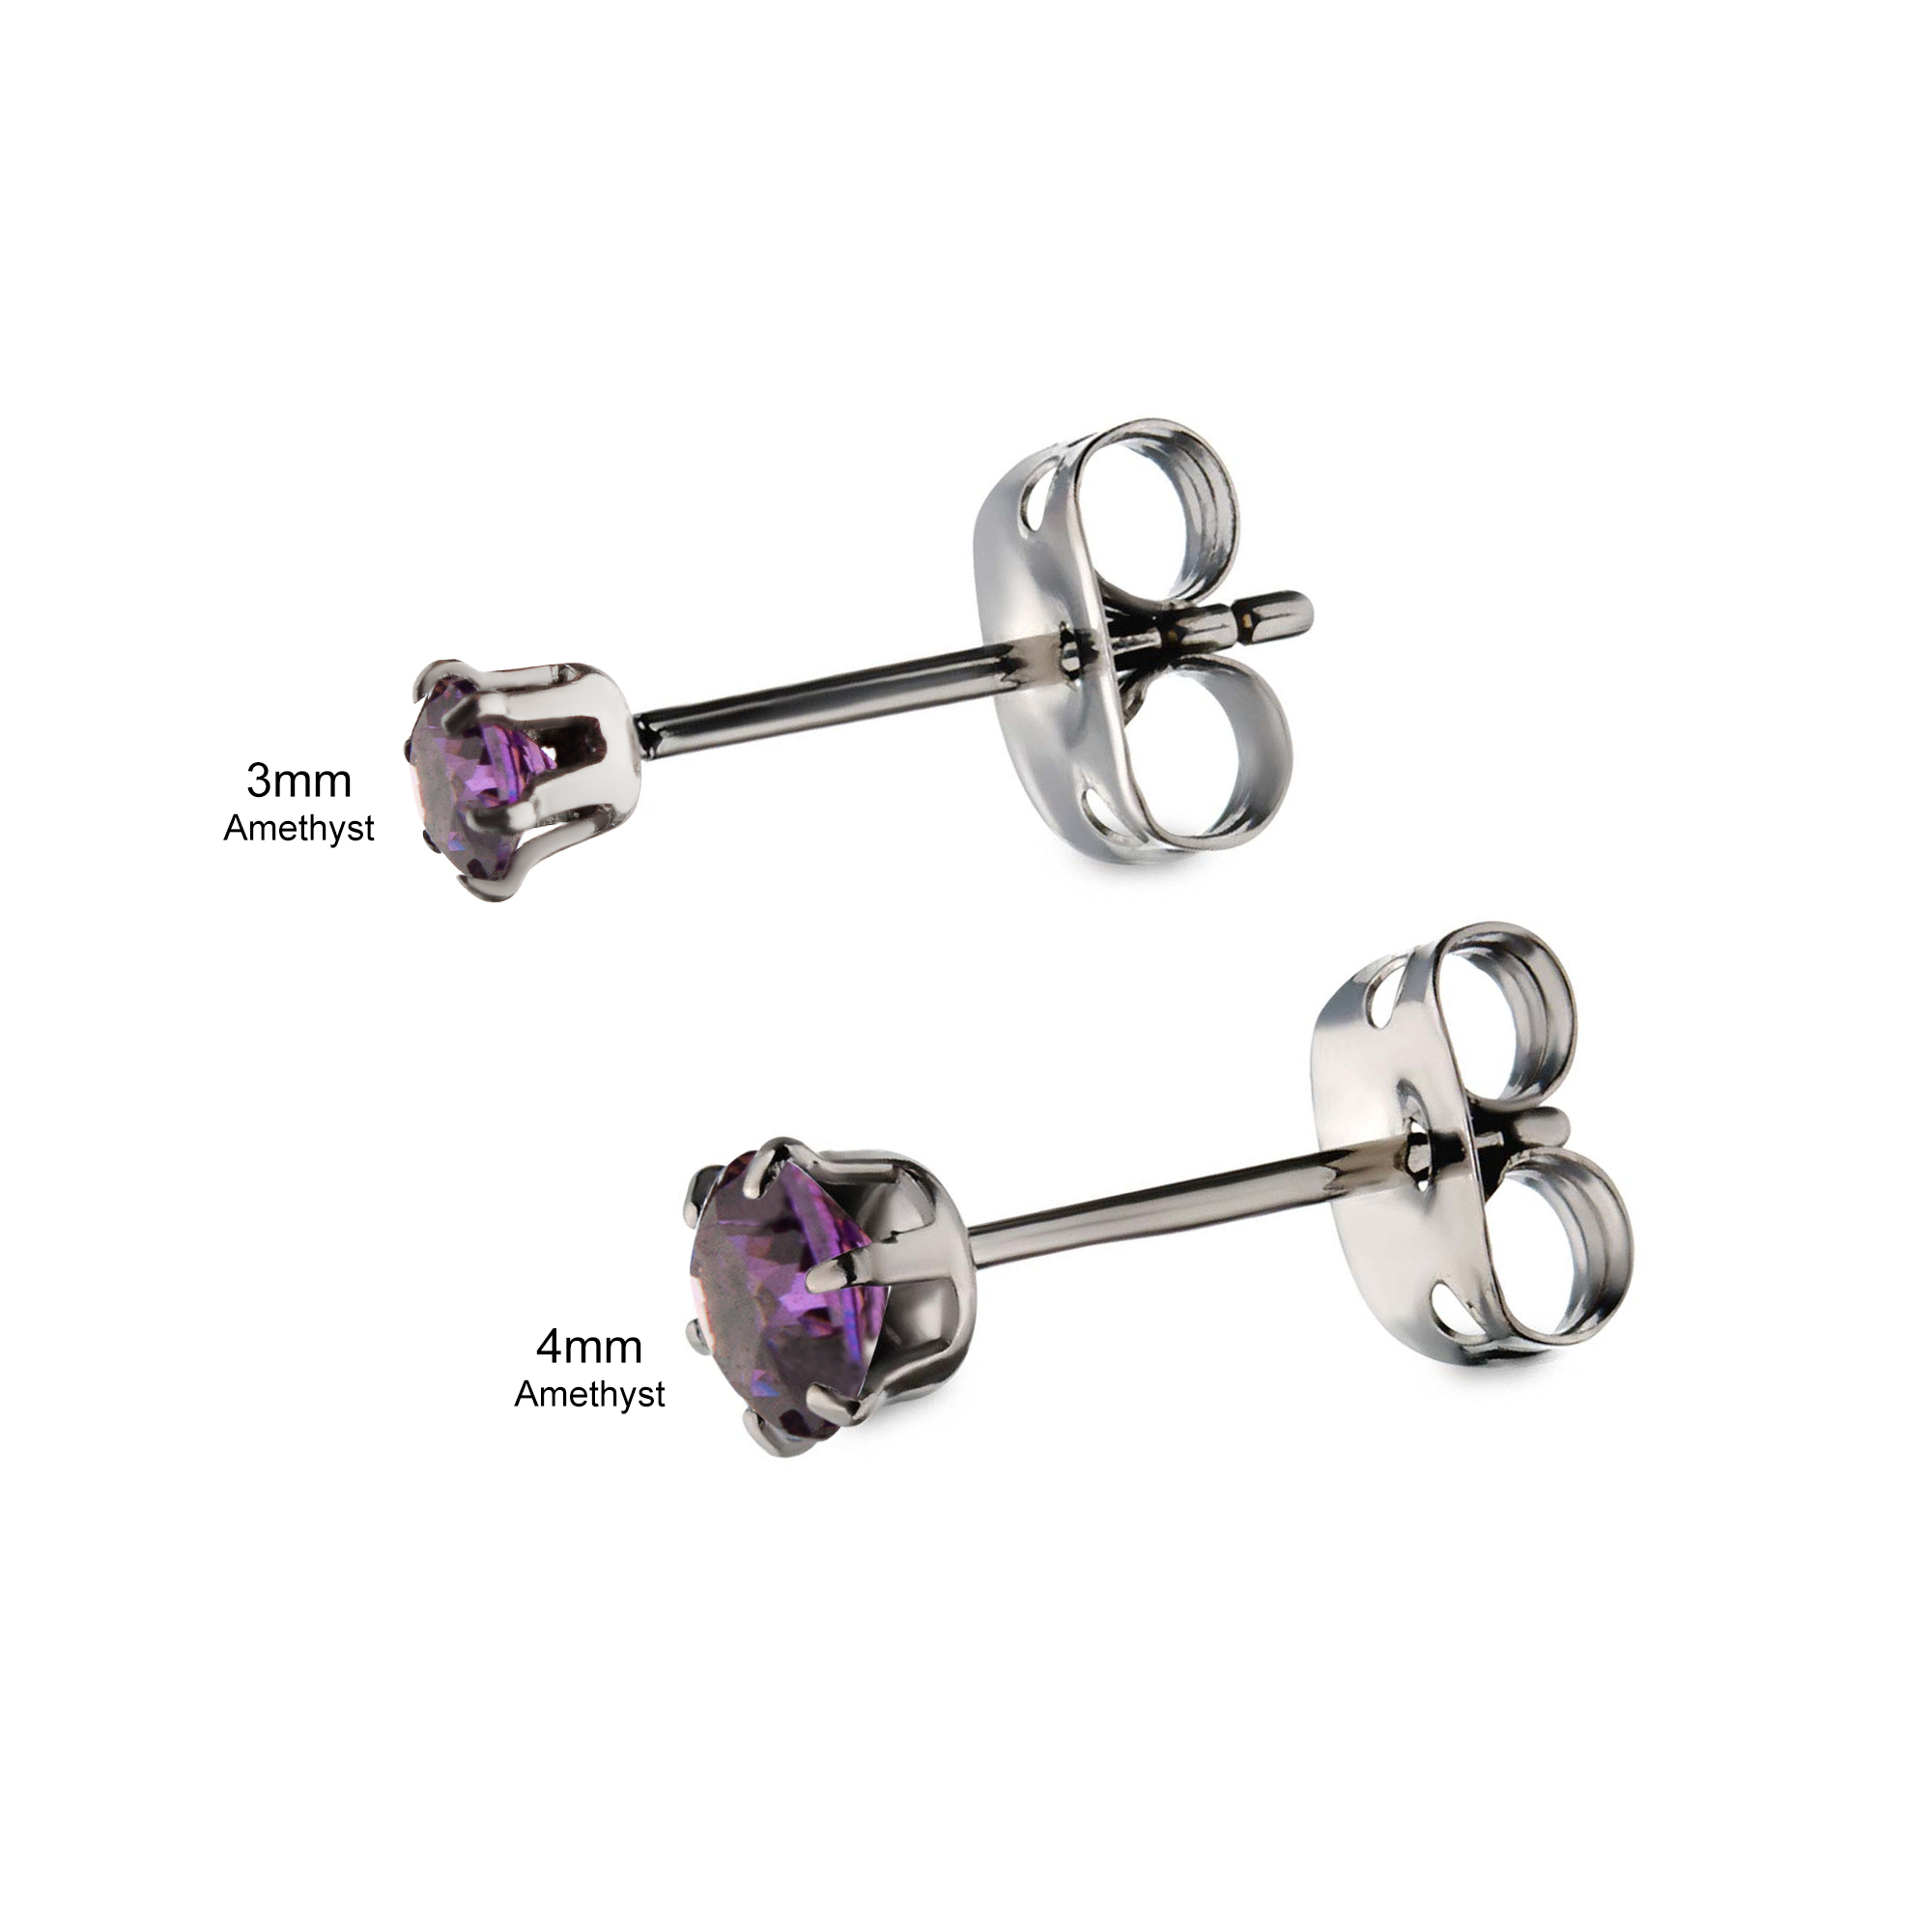 20g Titanium Post and Butterfly Back with Prong Set CZ Stud Earrings Image 5 Morin Jewelers Southbridge, MA